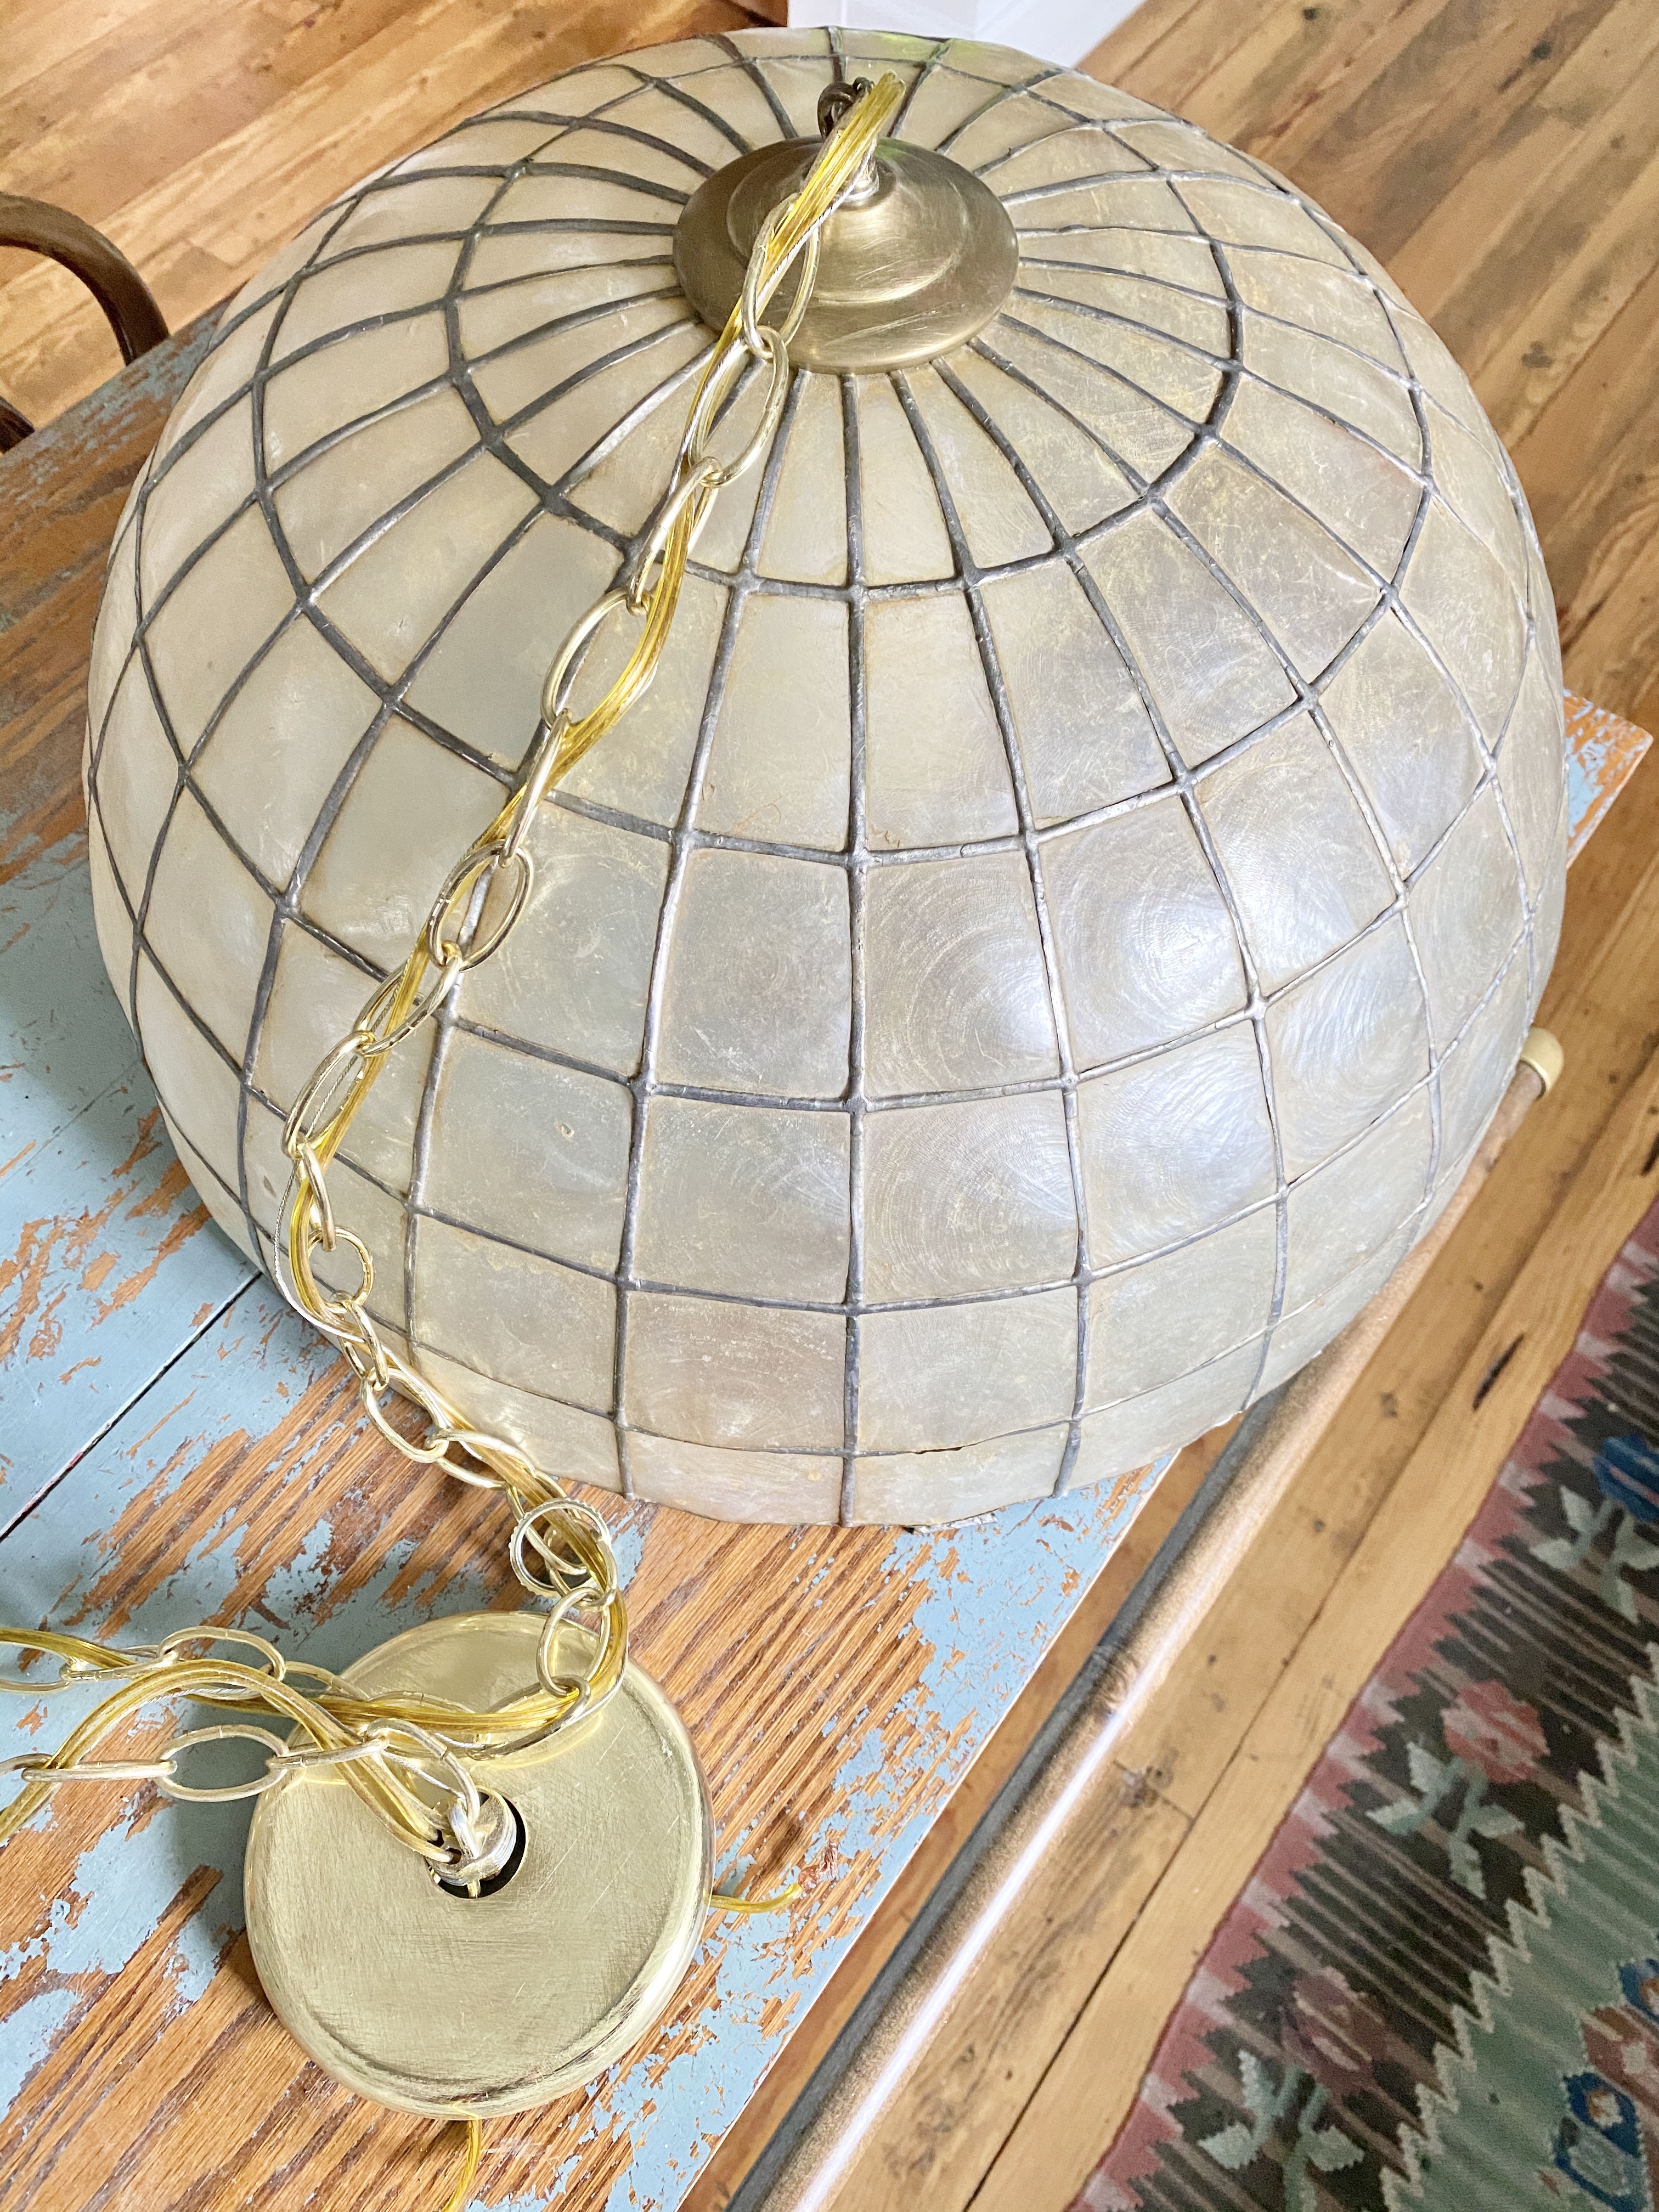 How to Make a DIY Hanging Capiz Shell Pendant Chandelier